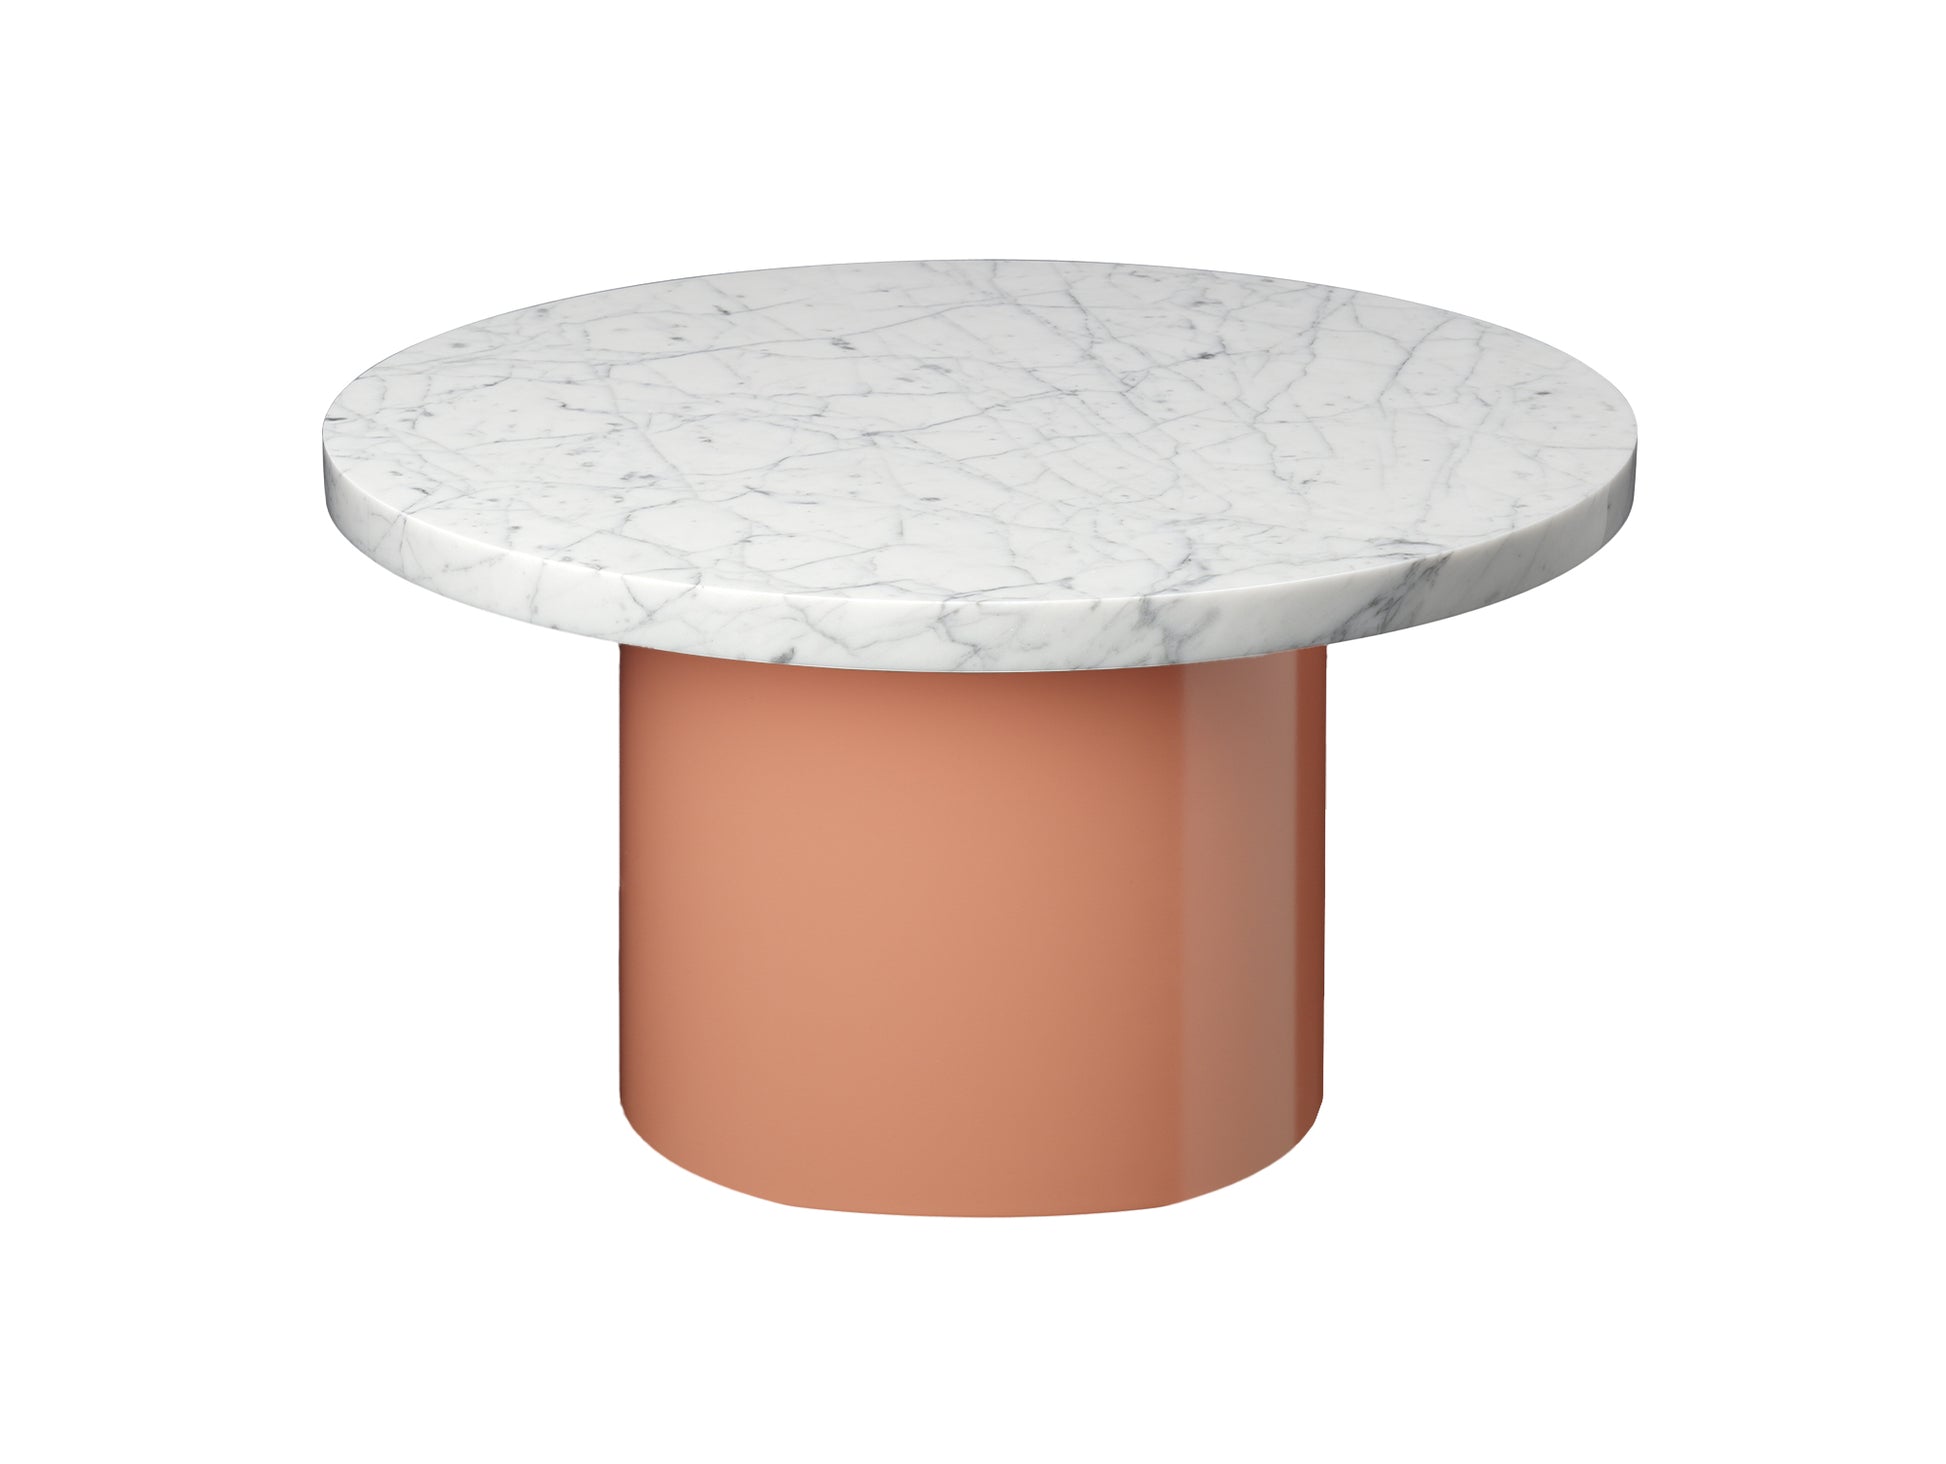 CT09 Enoki Side Table by e15 - (D55 H30 cm) Bianco Carrara Marble Tabletop  / Beige Red Steel Base